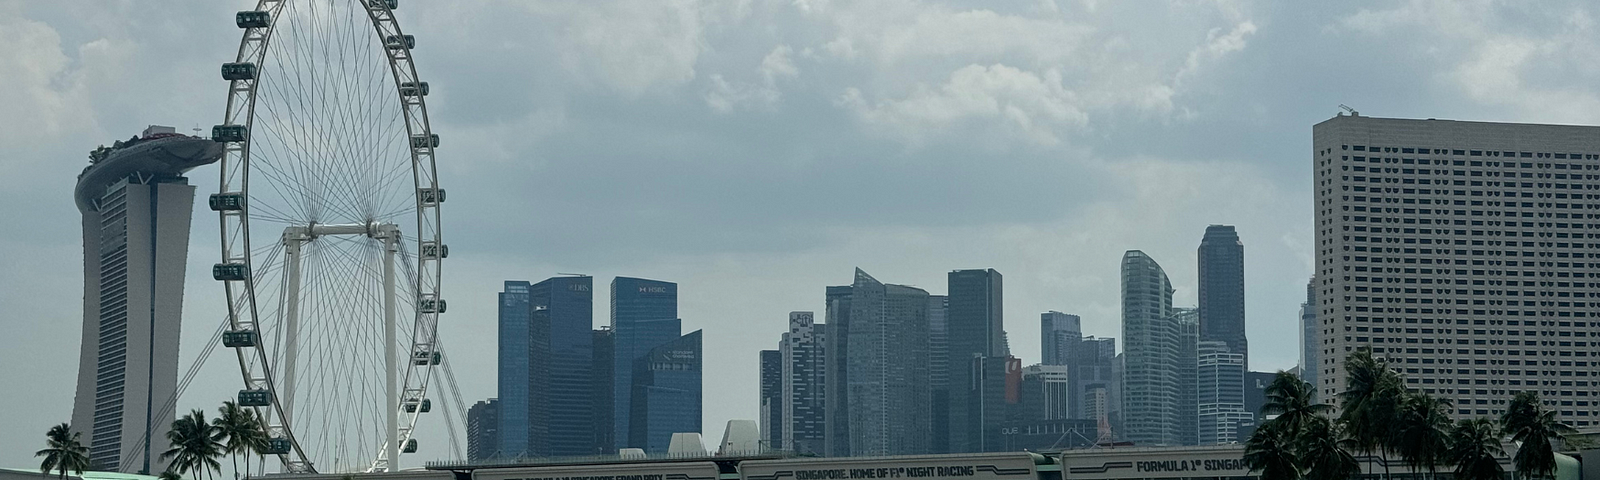 Several kayakers along the Marina Bay with the Marina Bay Sands and Singapore Flyer in the background